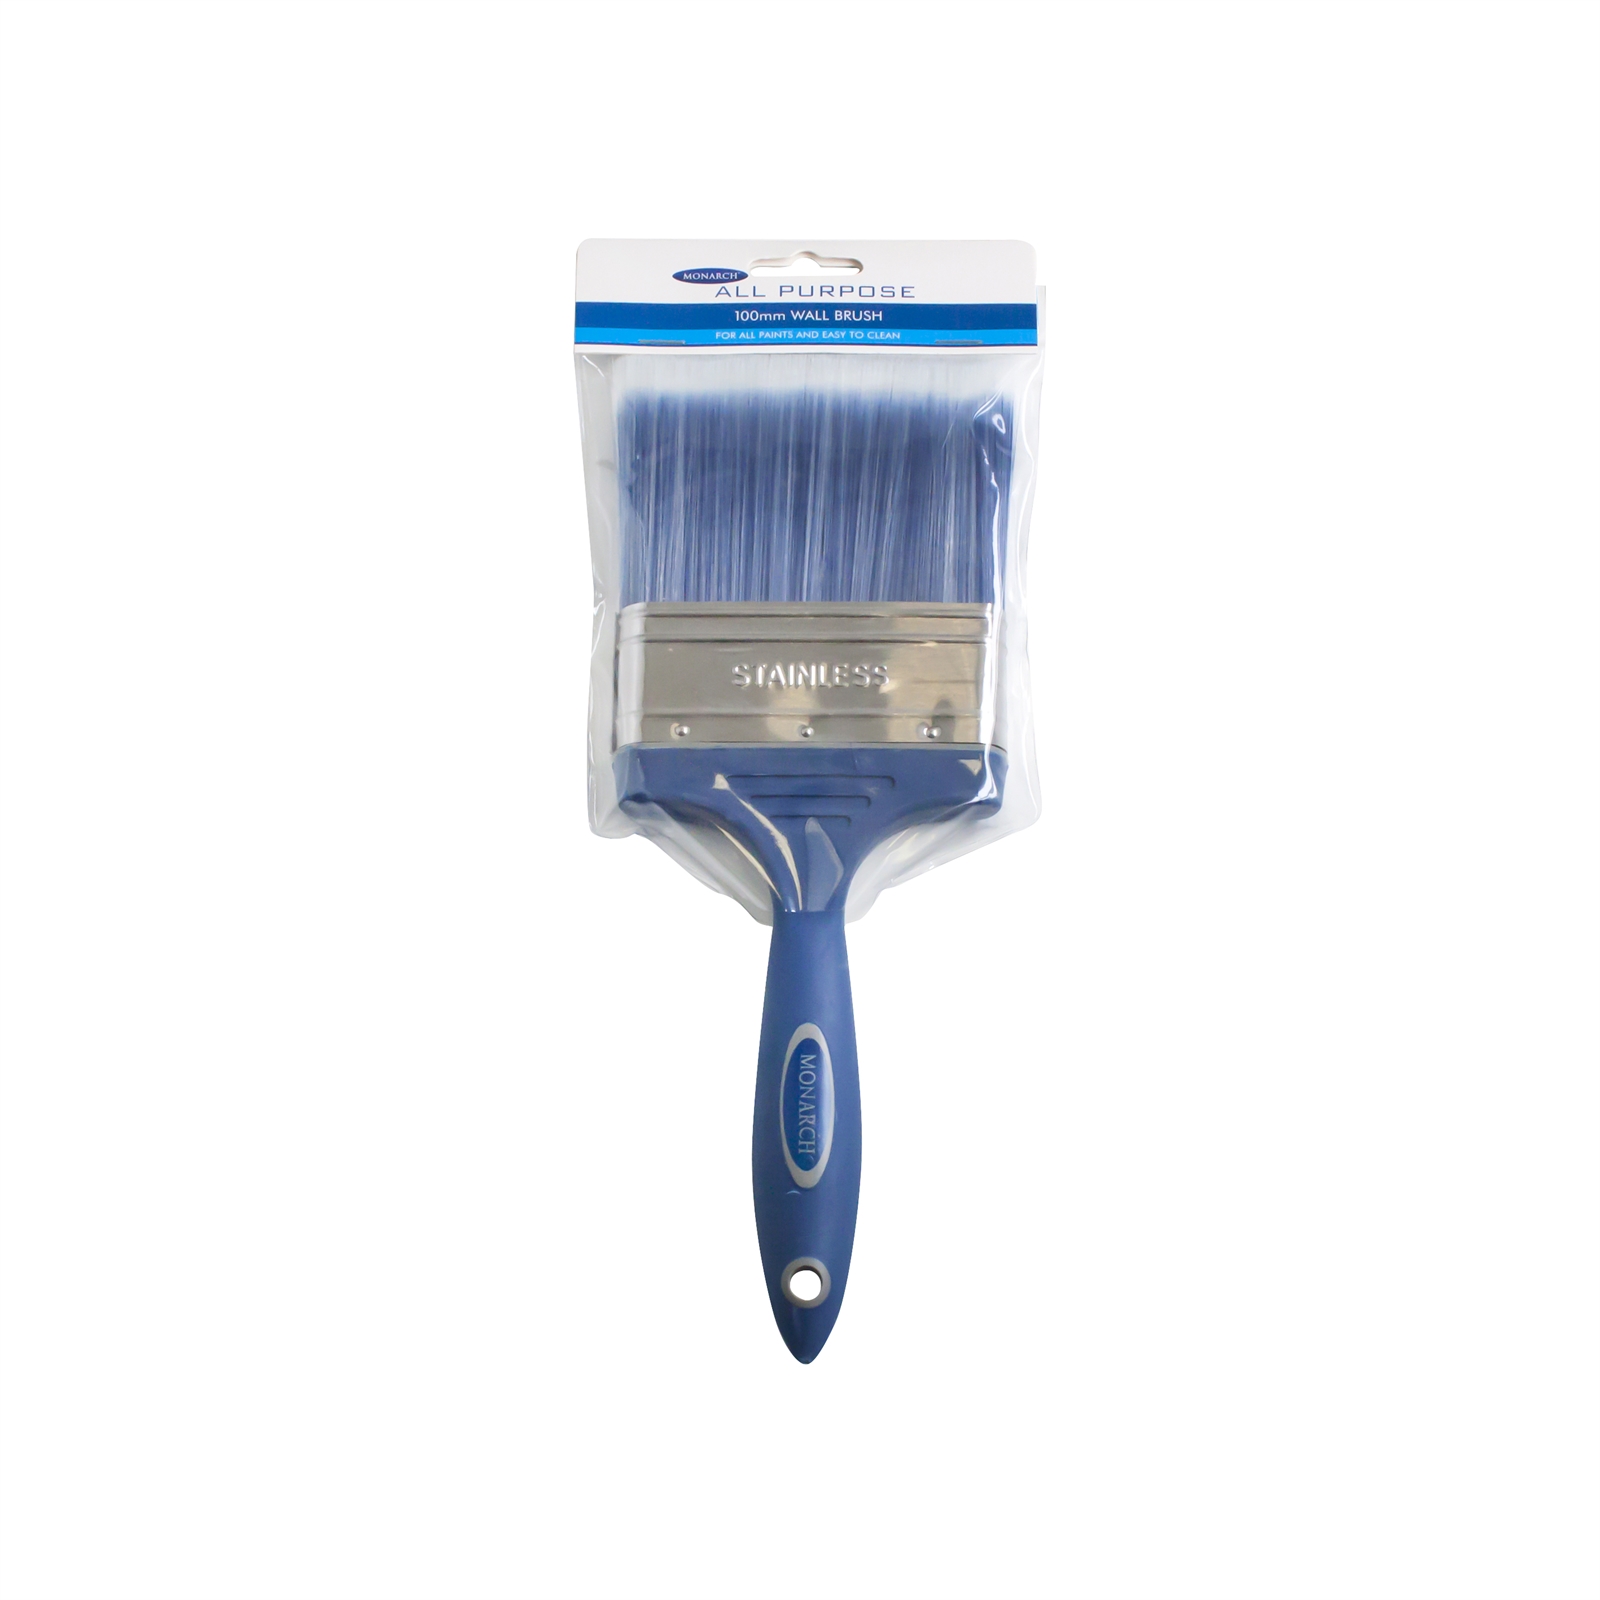 Monarch 100mm All Purpose Synthetic Wall Paint Brush